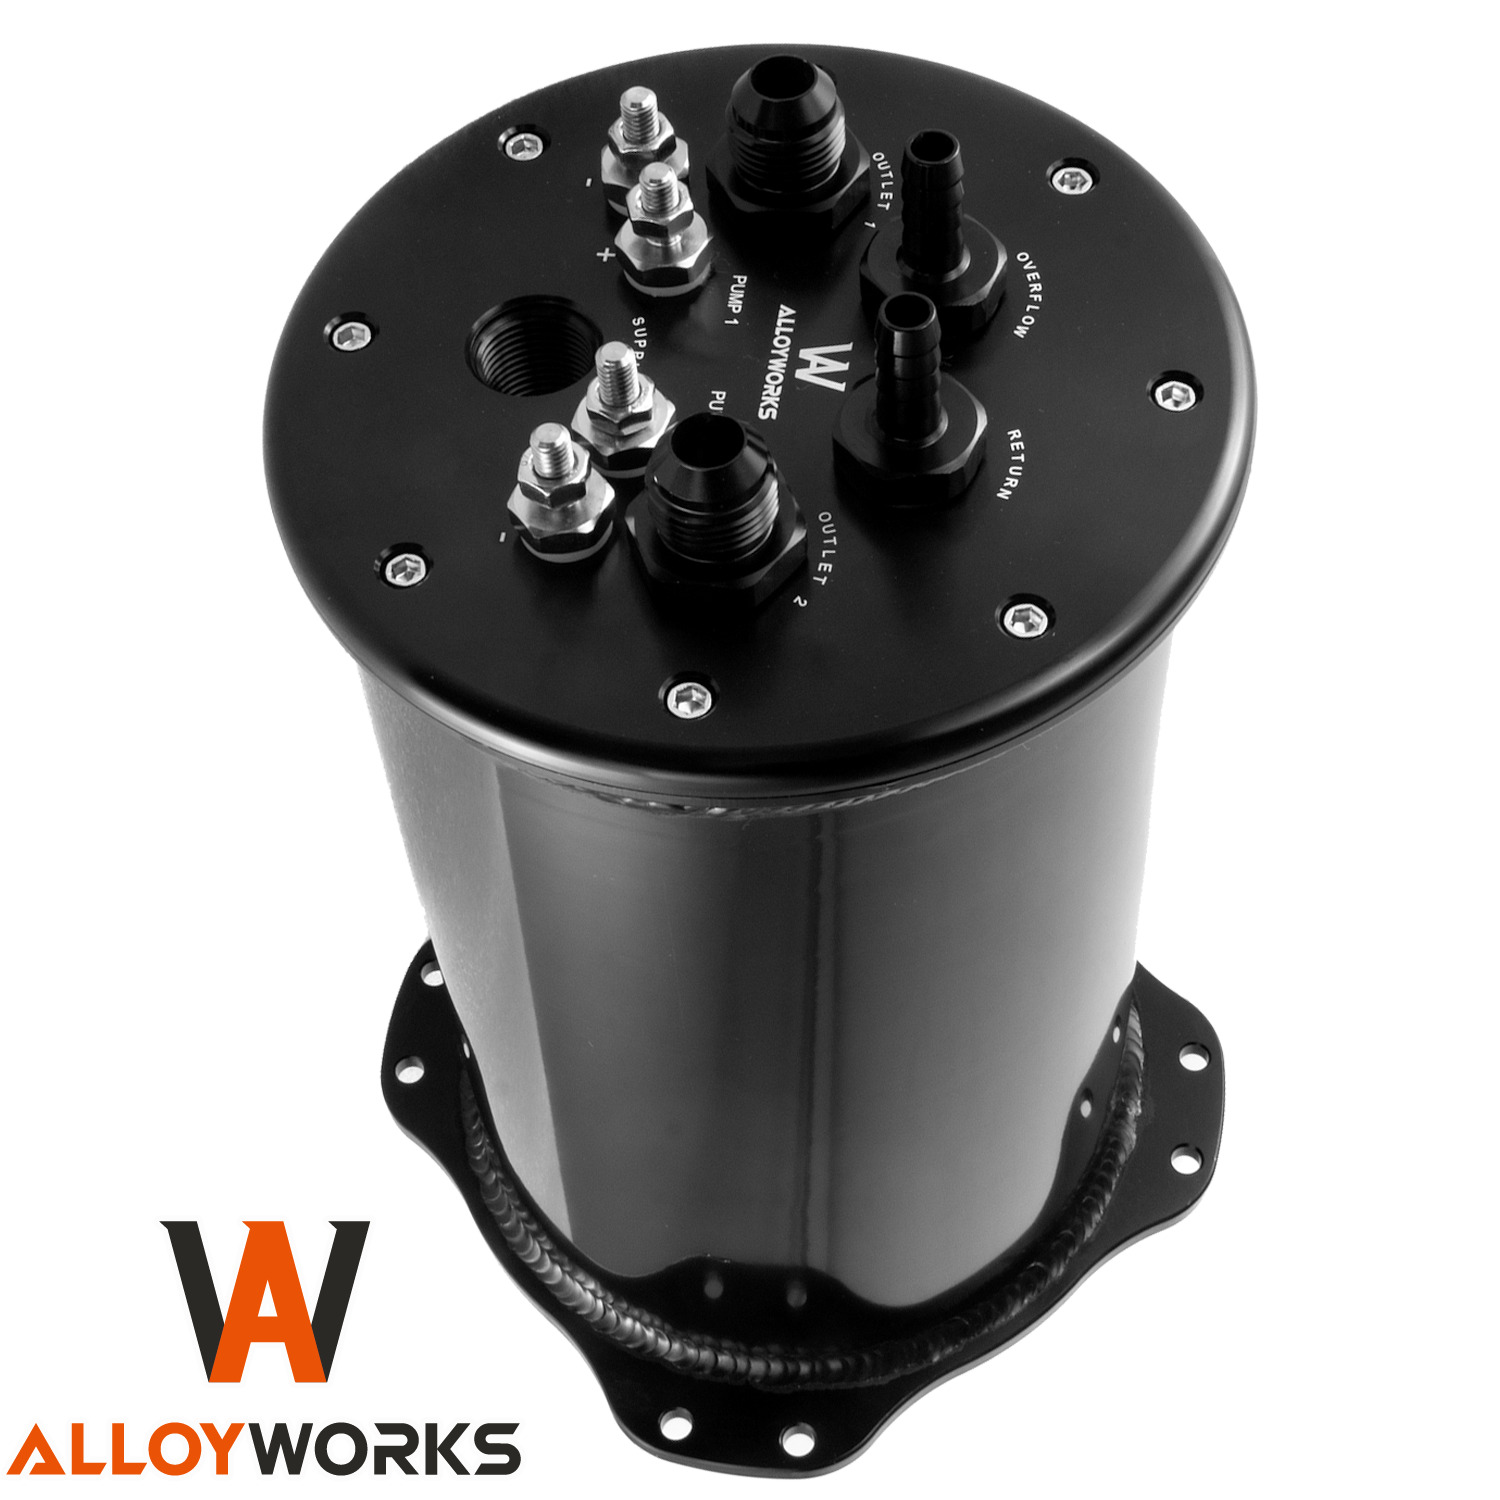 Fuel Surge Tank 2.8L For Single or 2.6L Black For Dual 39-40mm Pumps 8AN Ports